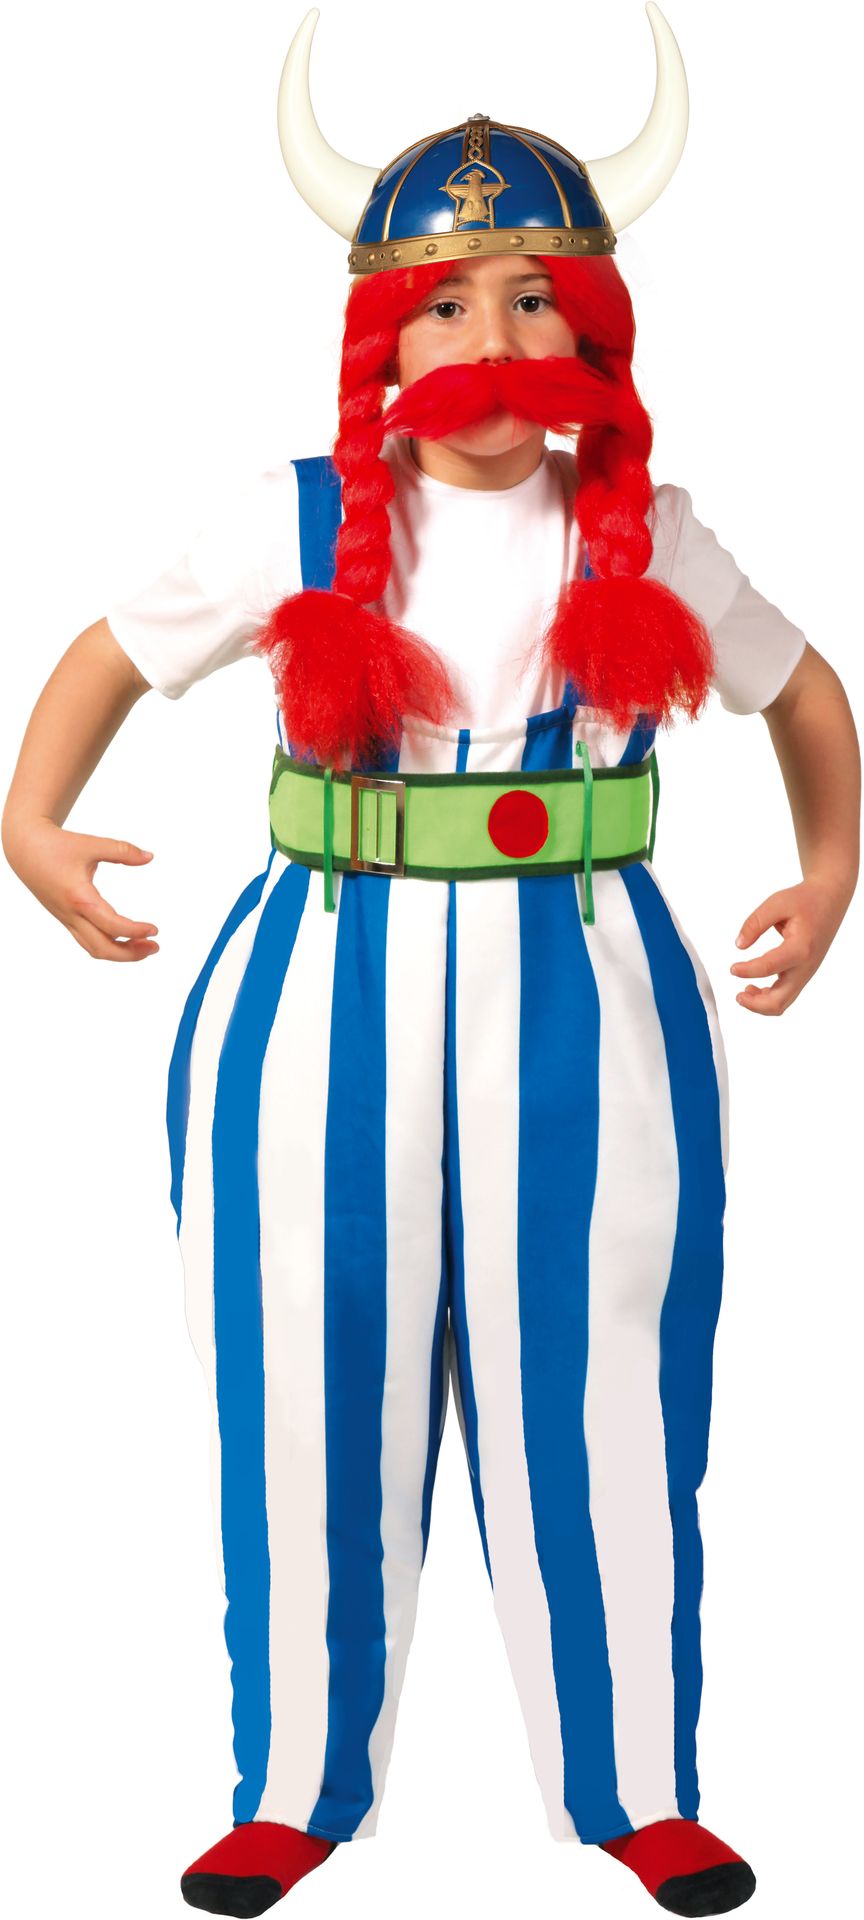 Obelix outfit kind